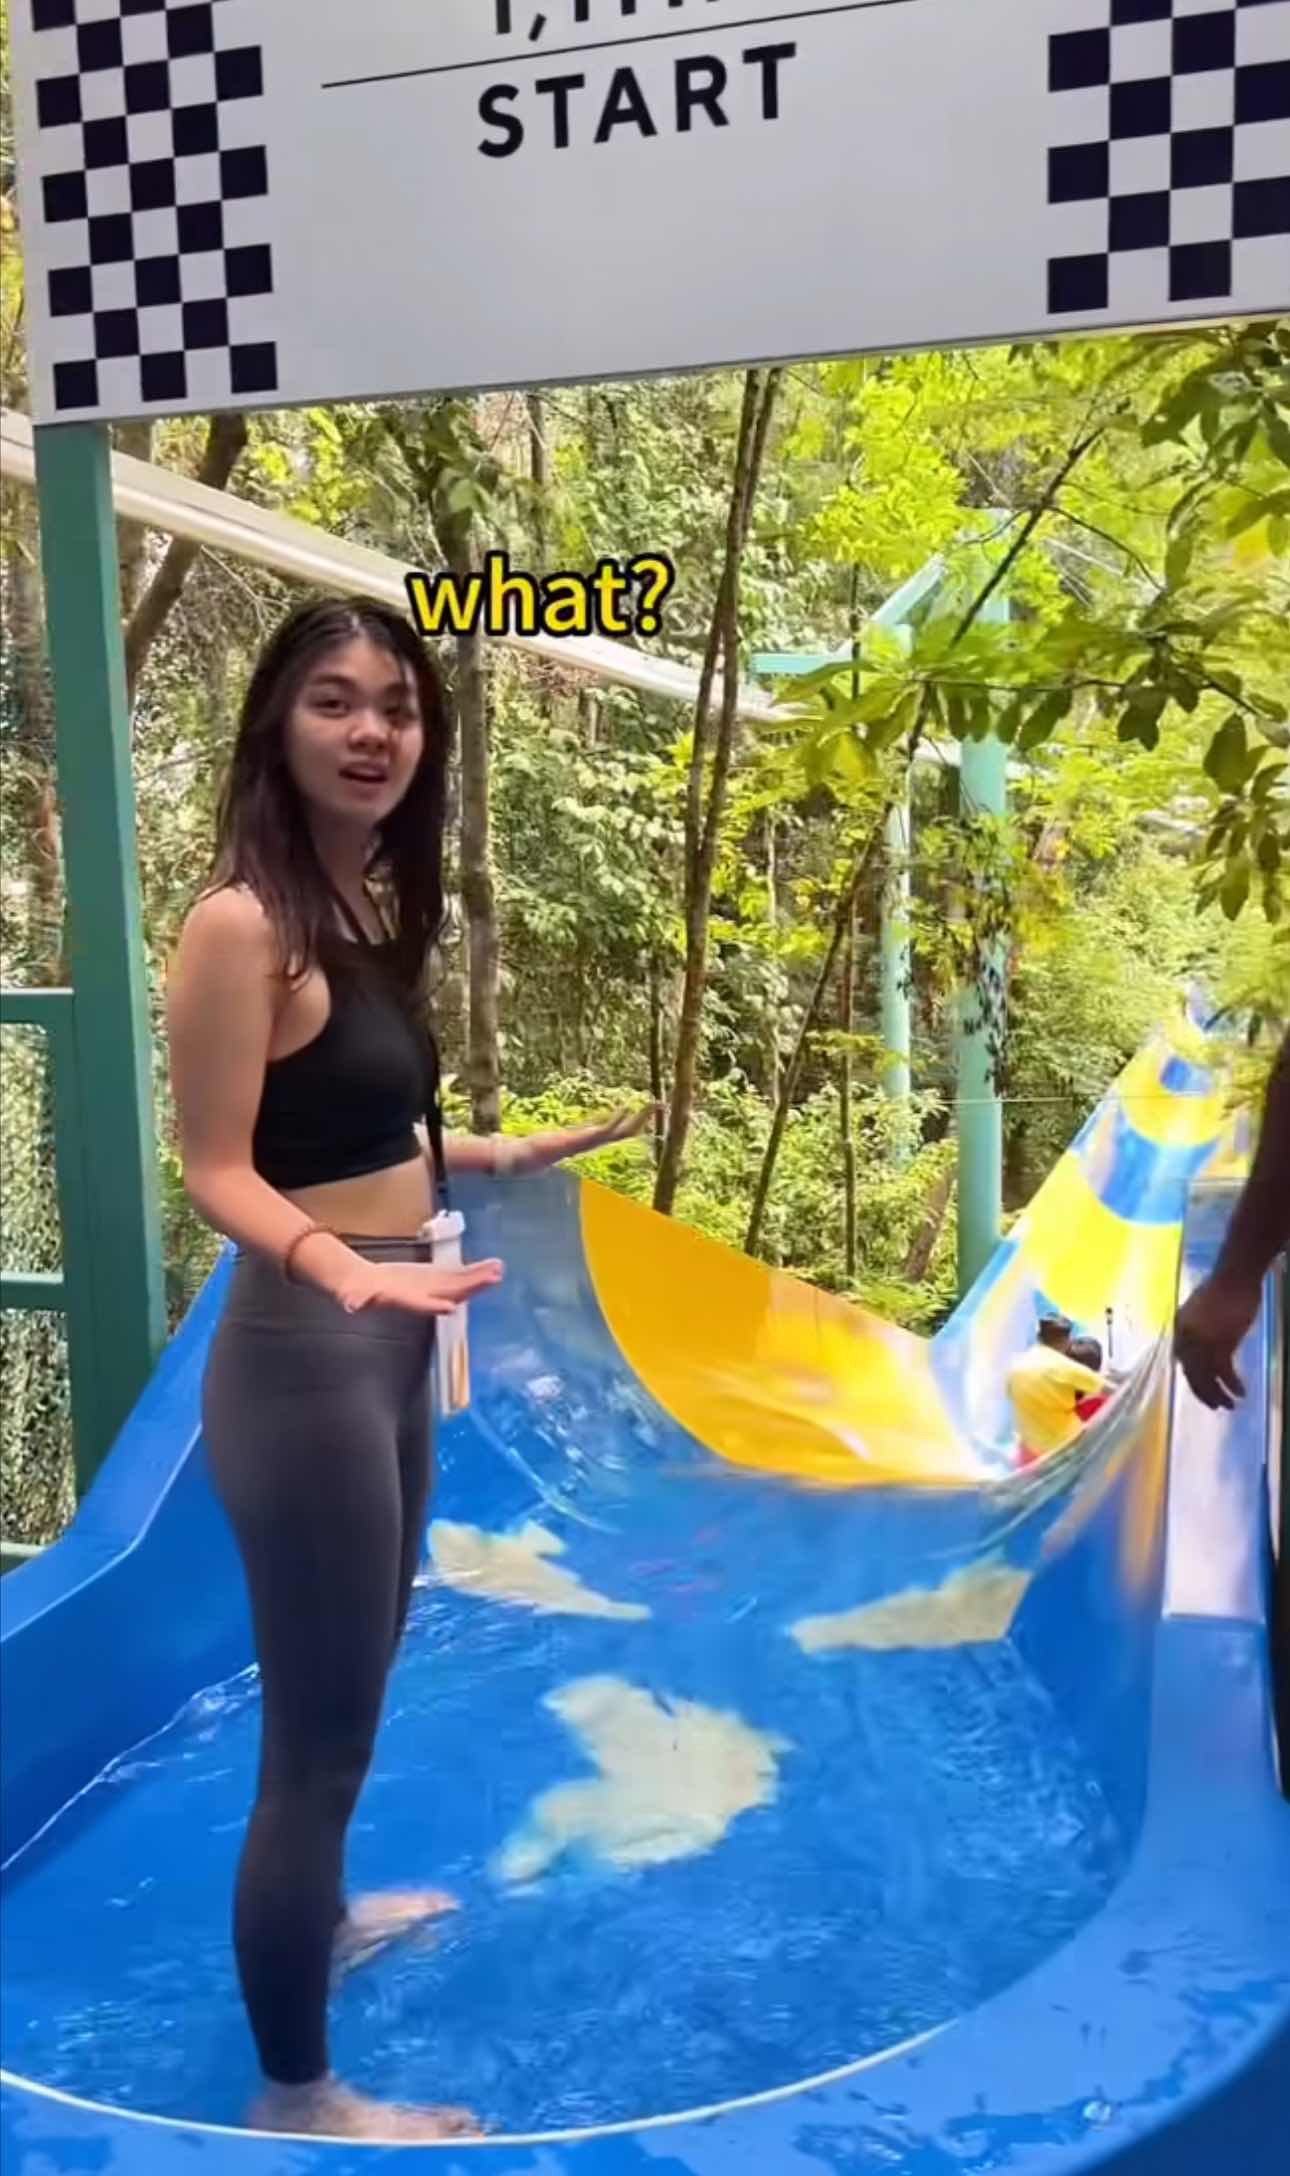 M'sian lifeguard accidentally joins man on water slide ride after he lost his footing